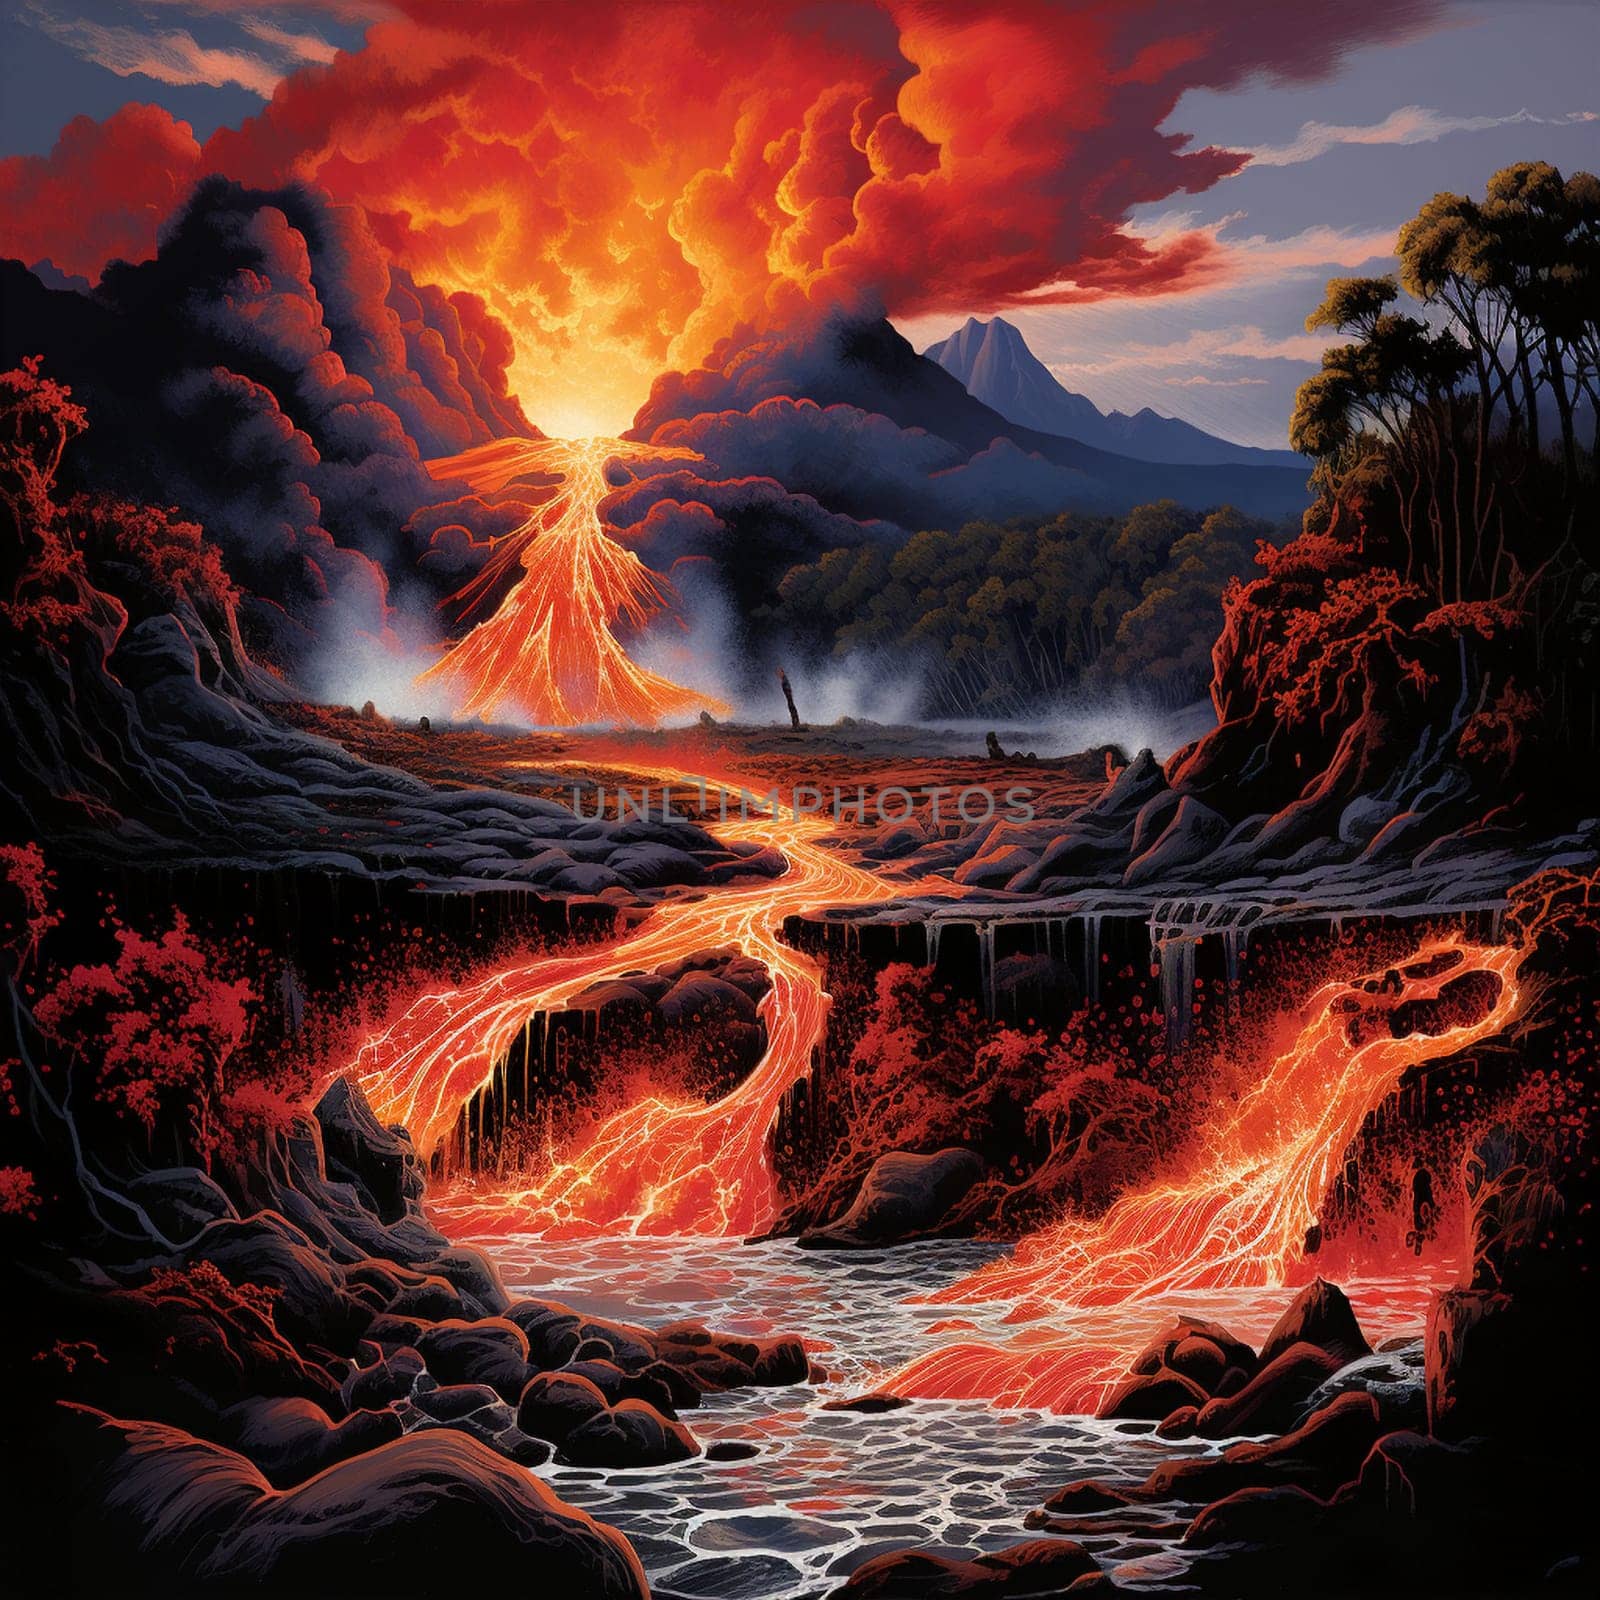 Experience the awe-inspiring power of nature with this visually striking image titled 'Lava Cascade.' Depicting a volcanic eruption, this artwork will transport viewers into the heart of a mesmerizing scene. Witness as a torrent of molten lava cascades down the slopes of a powerful volcano, showcasing the raw heat, destructive power, and sheer beauty of nature's fury. The vibrant colors, captivating composition, and intricate details of this realistic art style will captivate viewers and leave them in awe of the immense forces at play. This image is perfect for microstock sites, where it will undoubtedly attract attention and make a lasting impression.